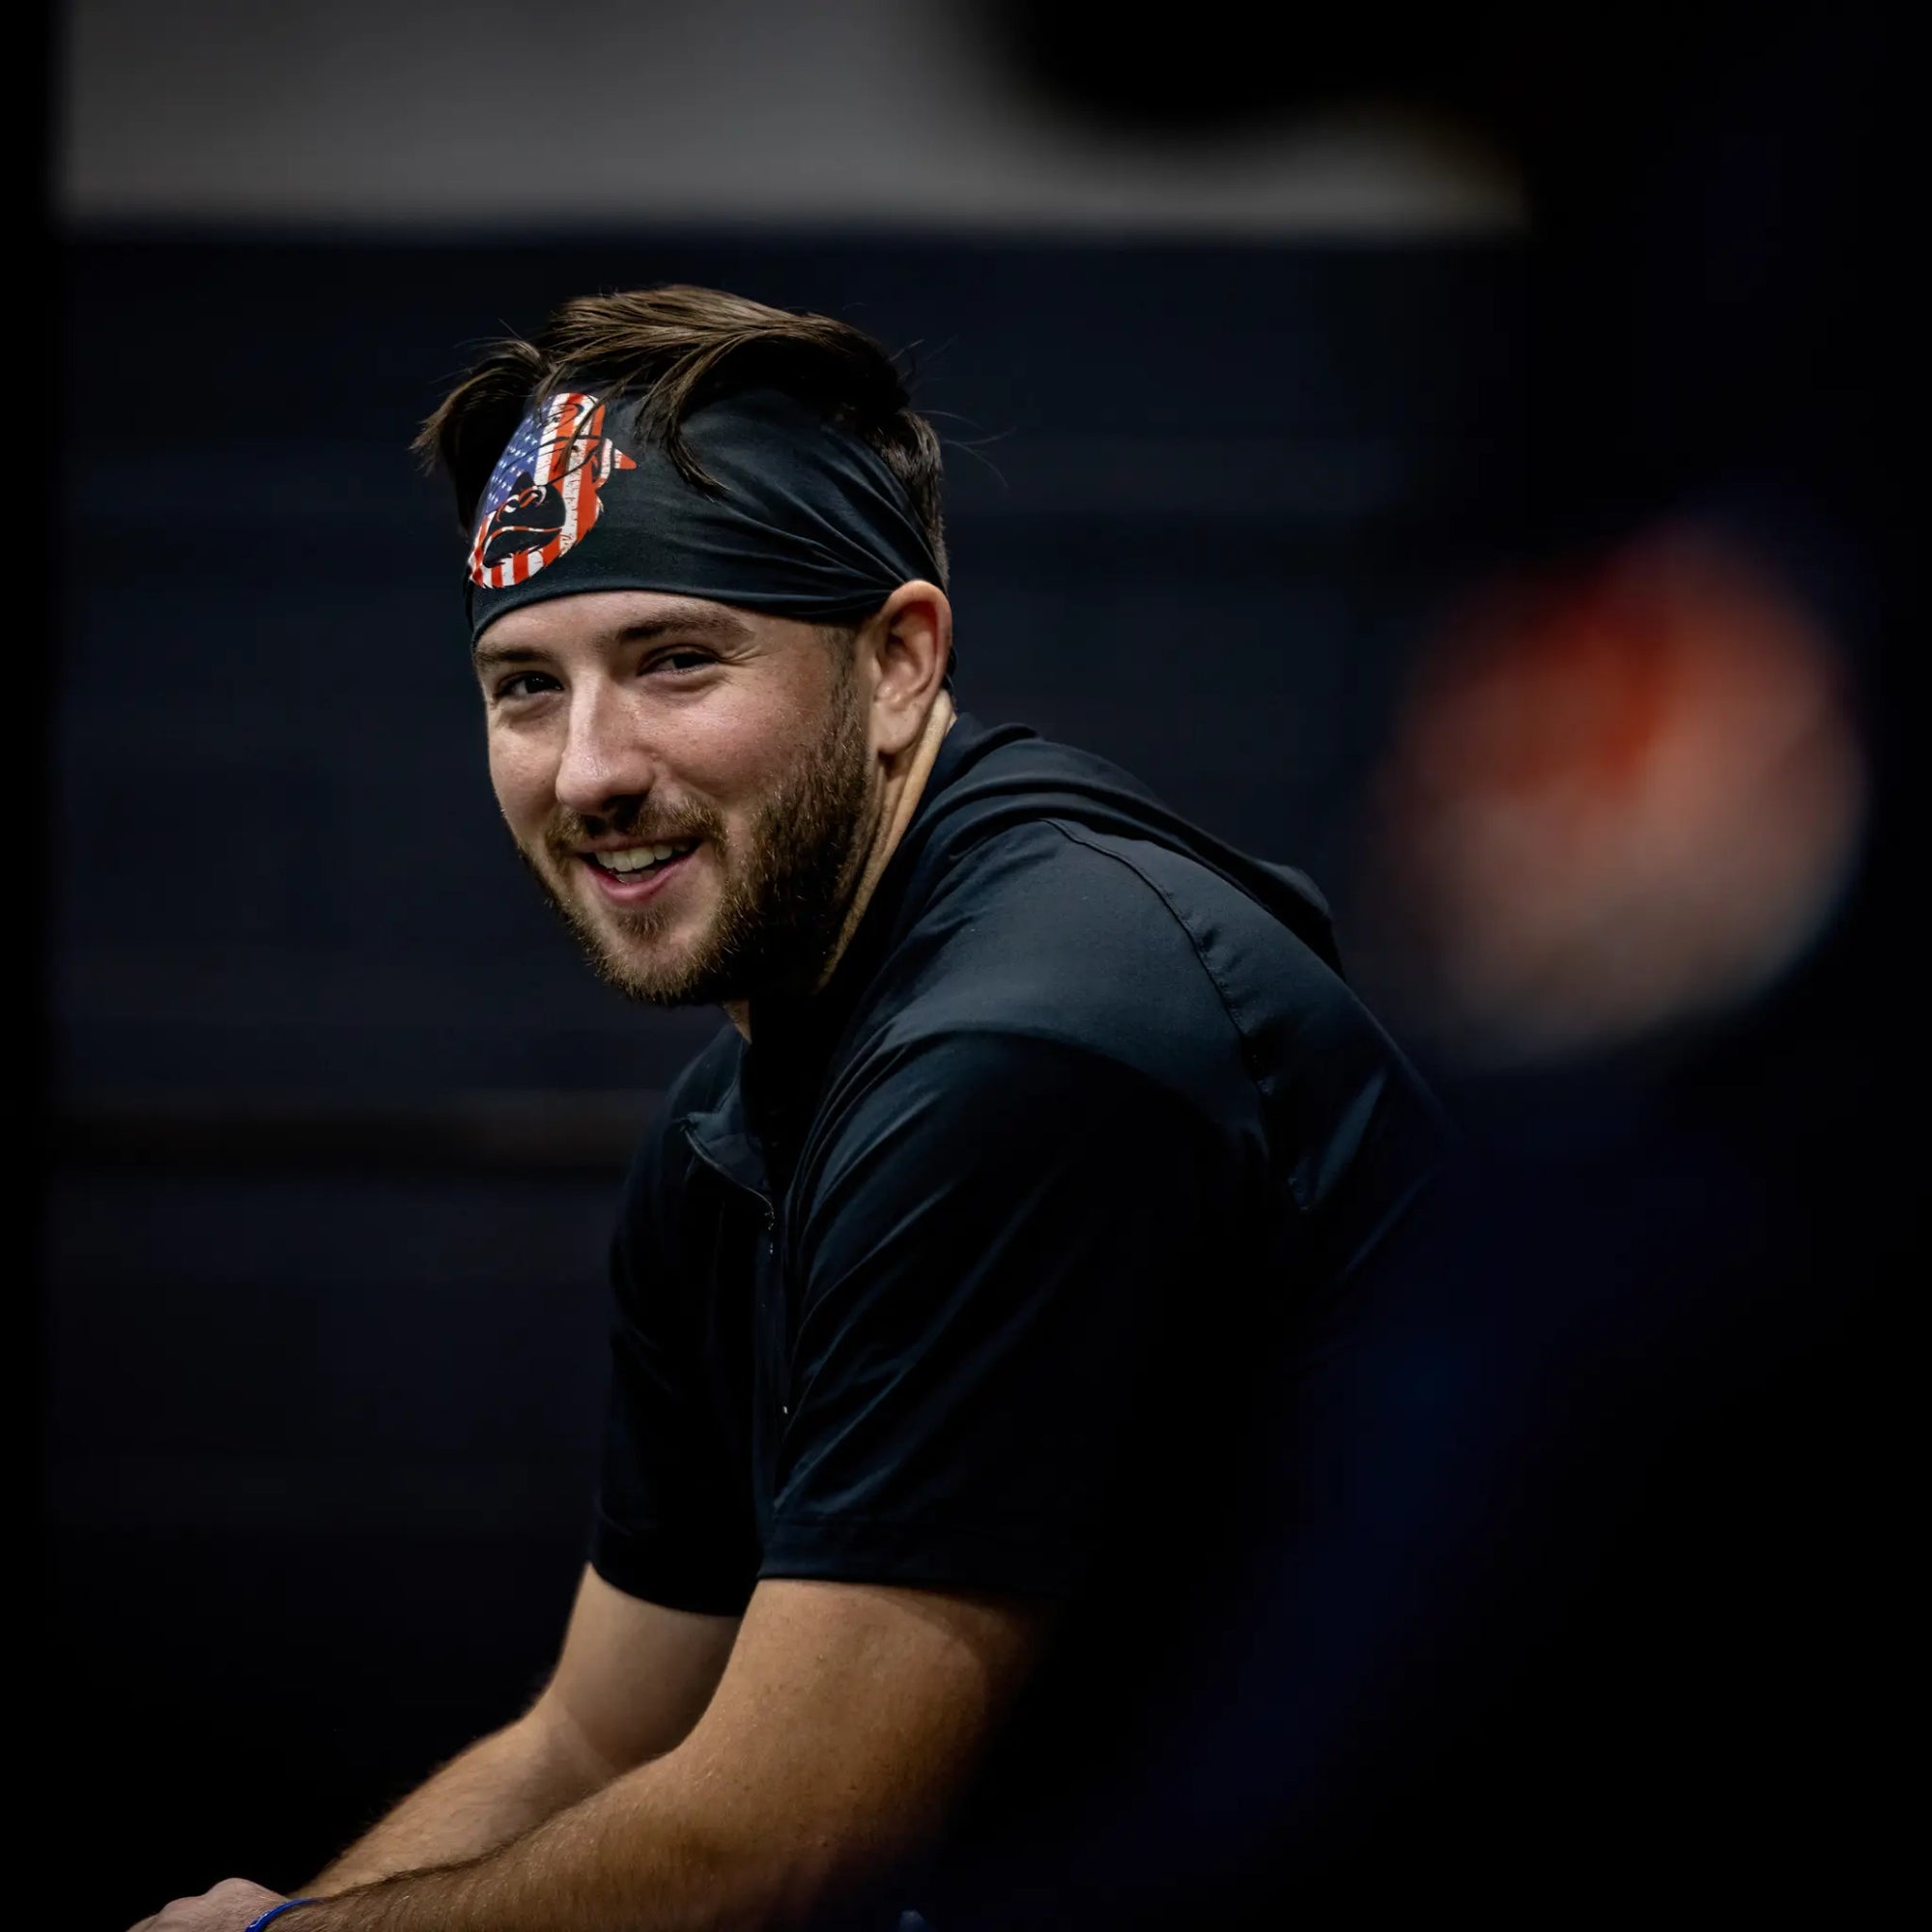 Moisture-wicking black Tater Kong headband featuring a stylized USA flag patch, designed for baseball training and workout sessions to keep players cool and focused.